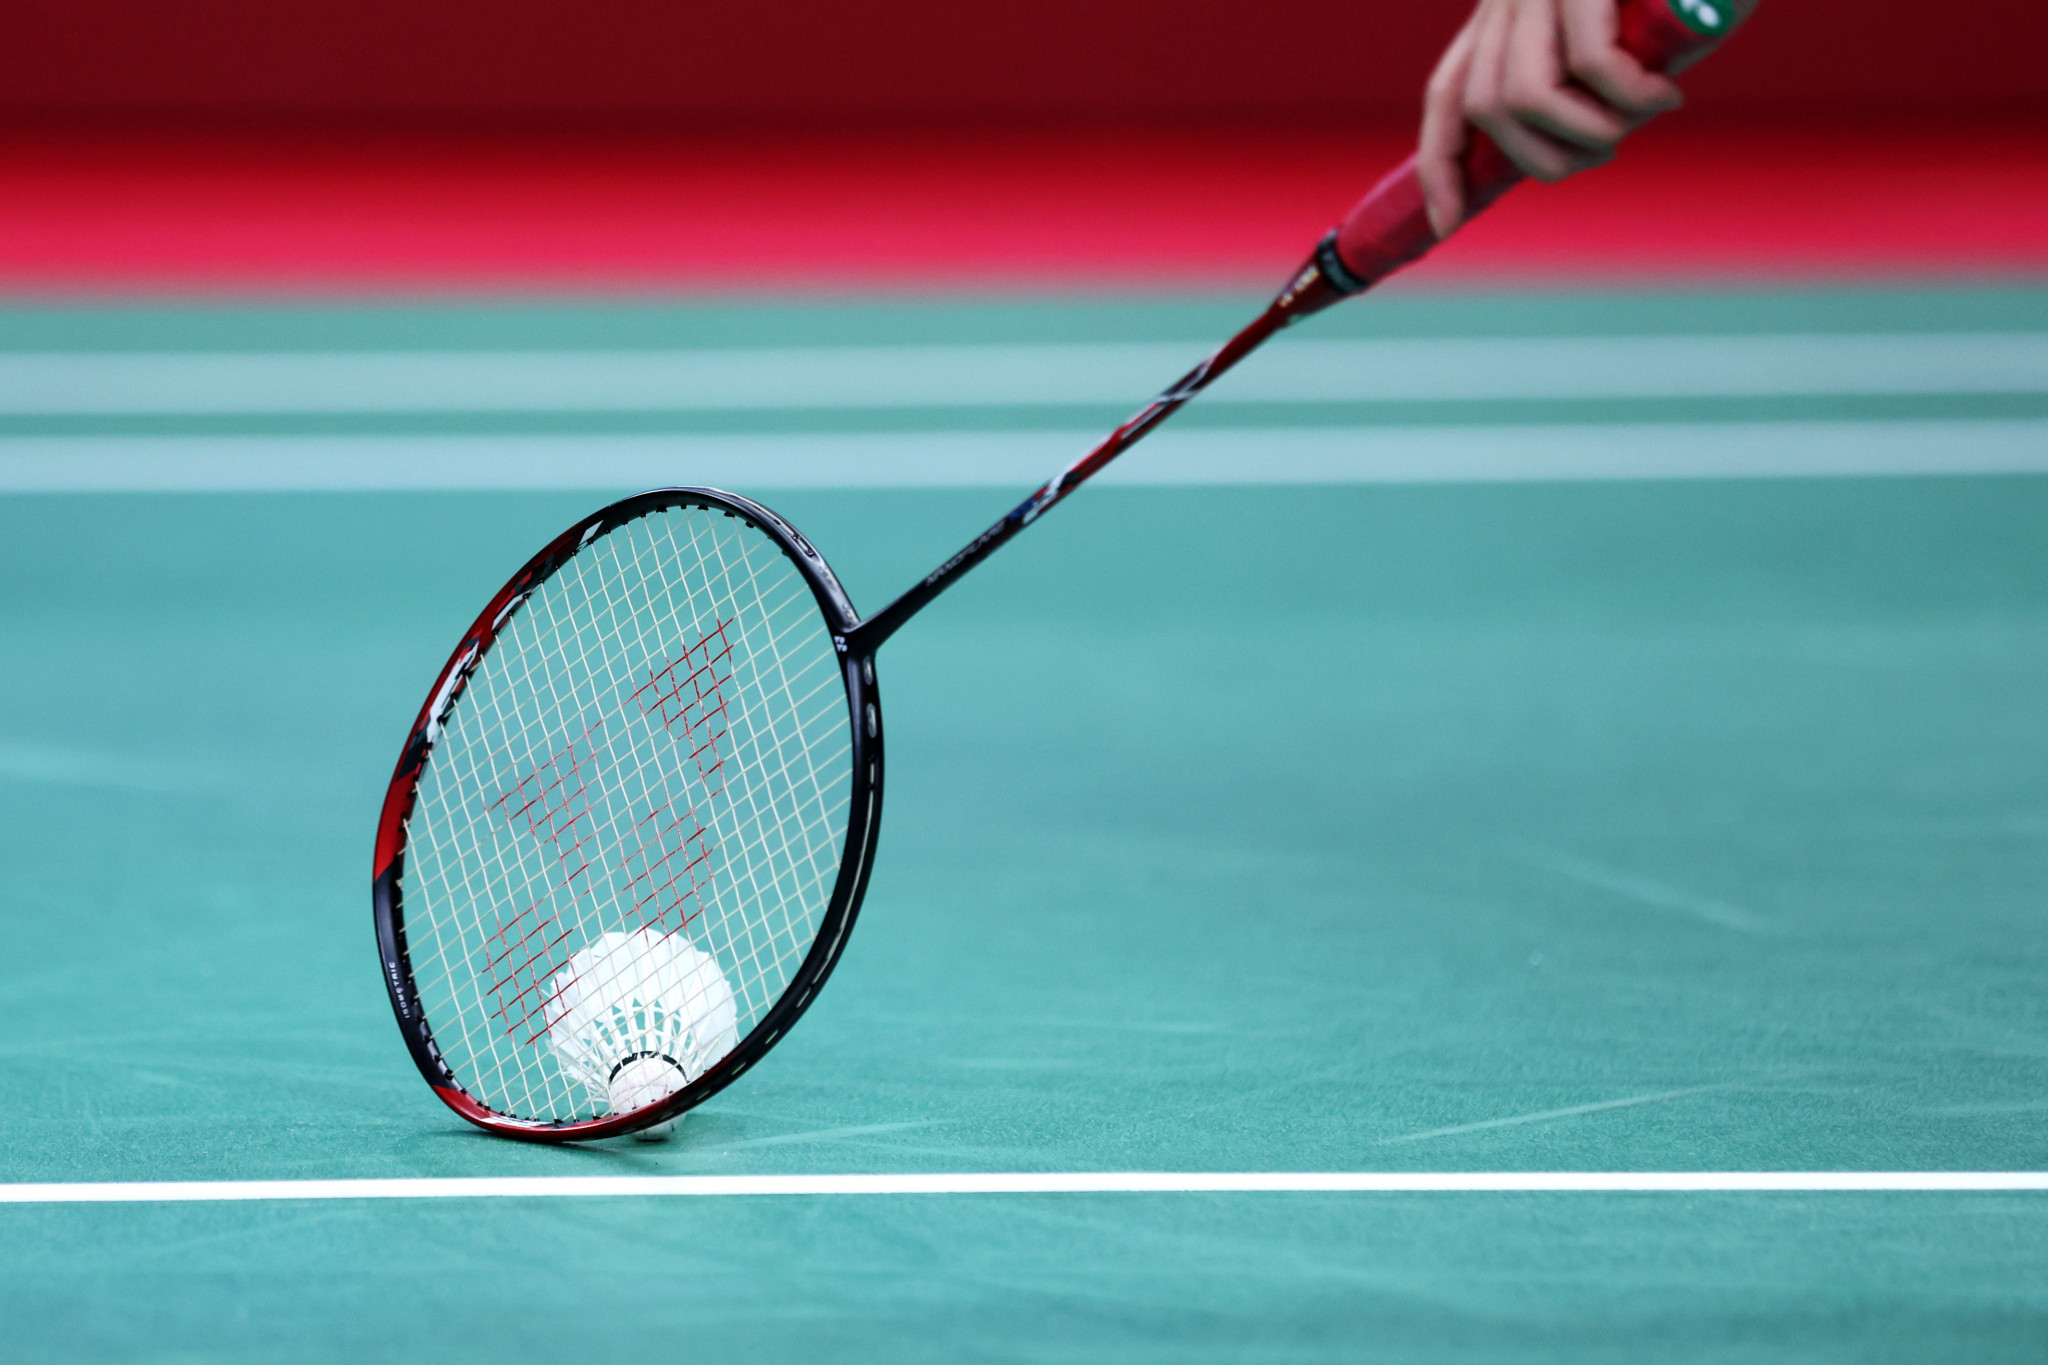 Manila to host Badminton Asia Championships after twoyear break